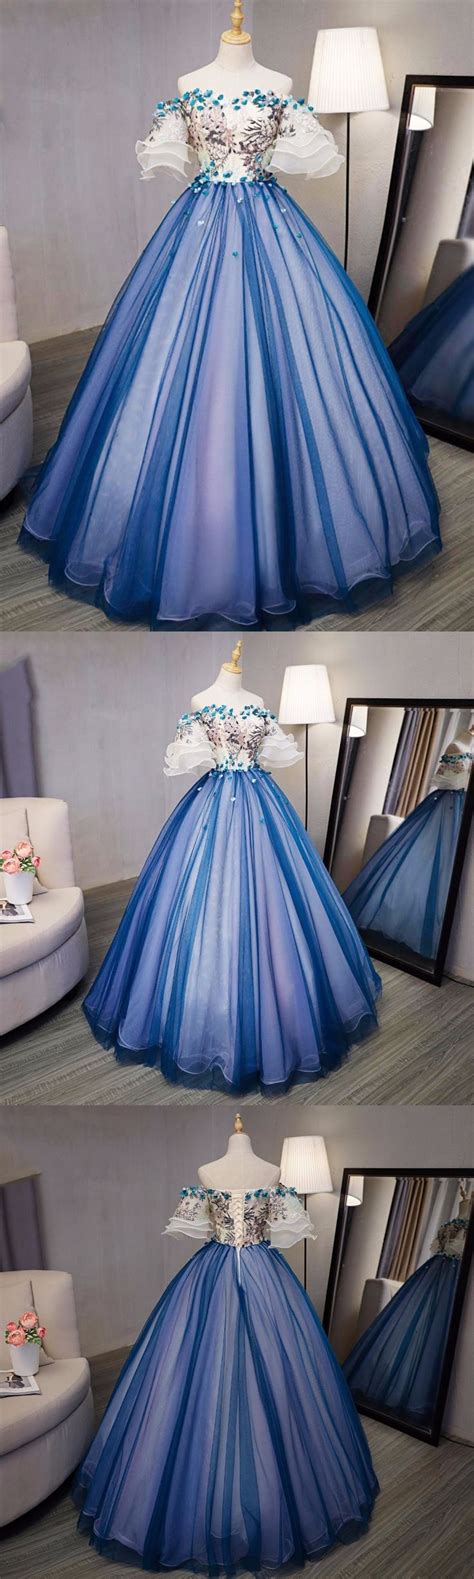 Ball Gown Prom Dresses Royal Blue And Ivory Hand Made Flower Prom Dressevening Dress Jkl348